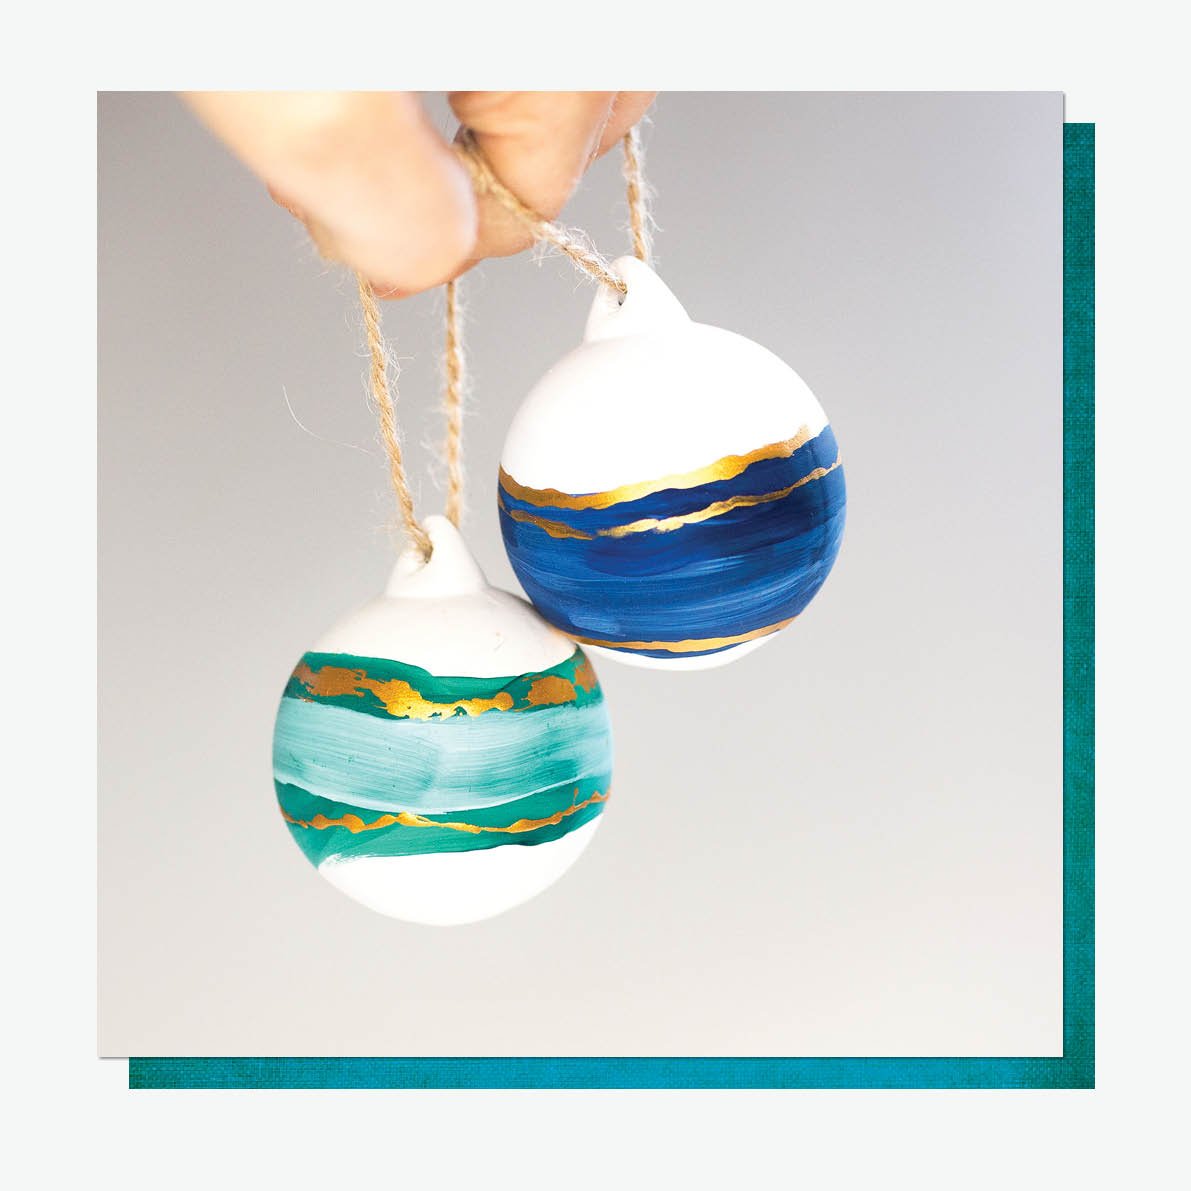 The Year of Hope Bauble. Acrylic Bauble 2021 Christmas Bauble